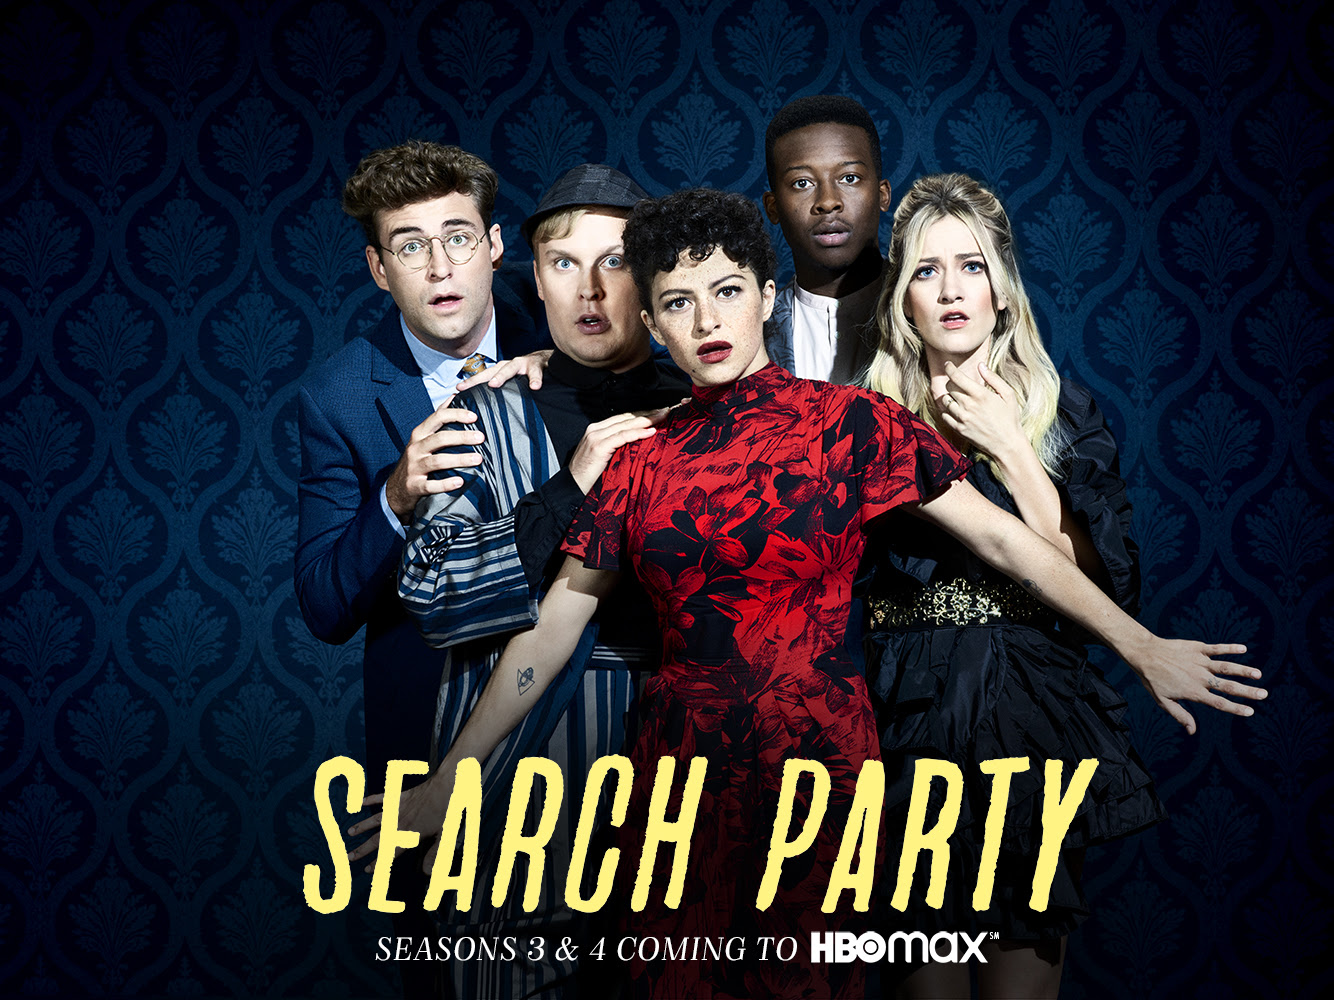 Search Party moves to HBO Max for seasons 3-4